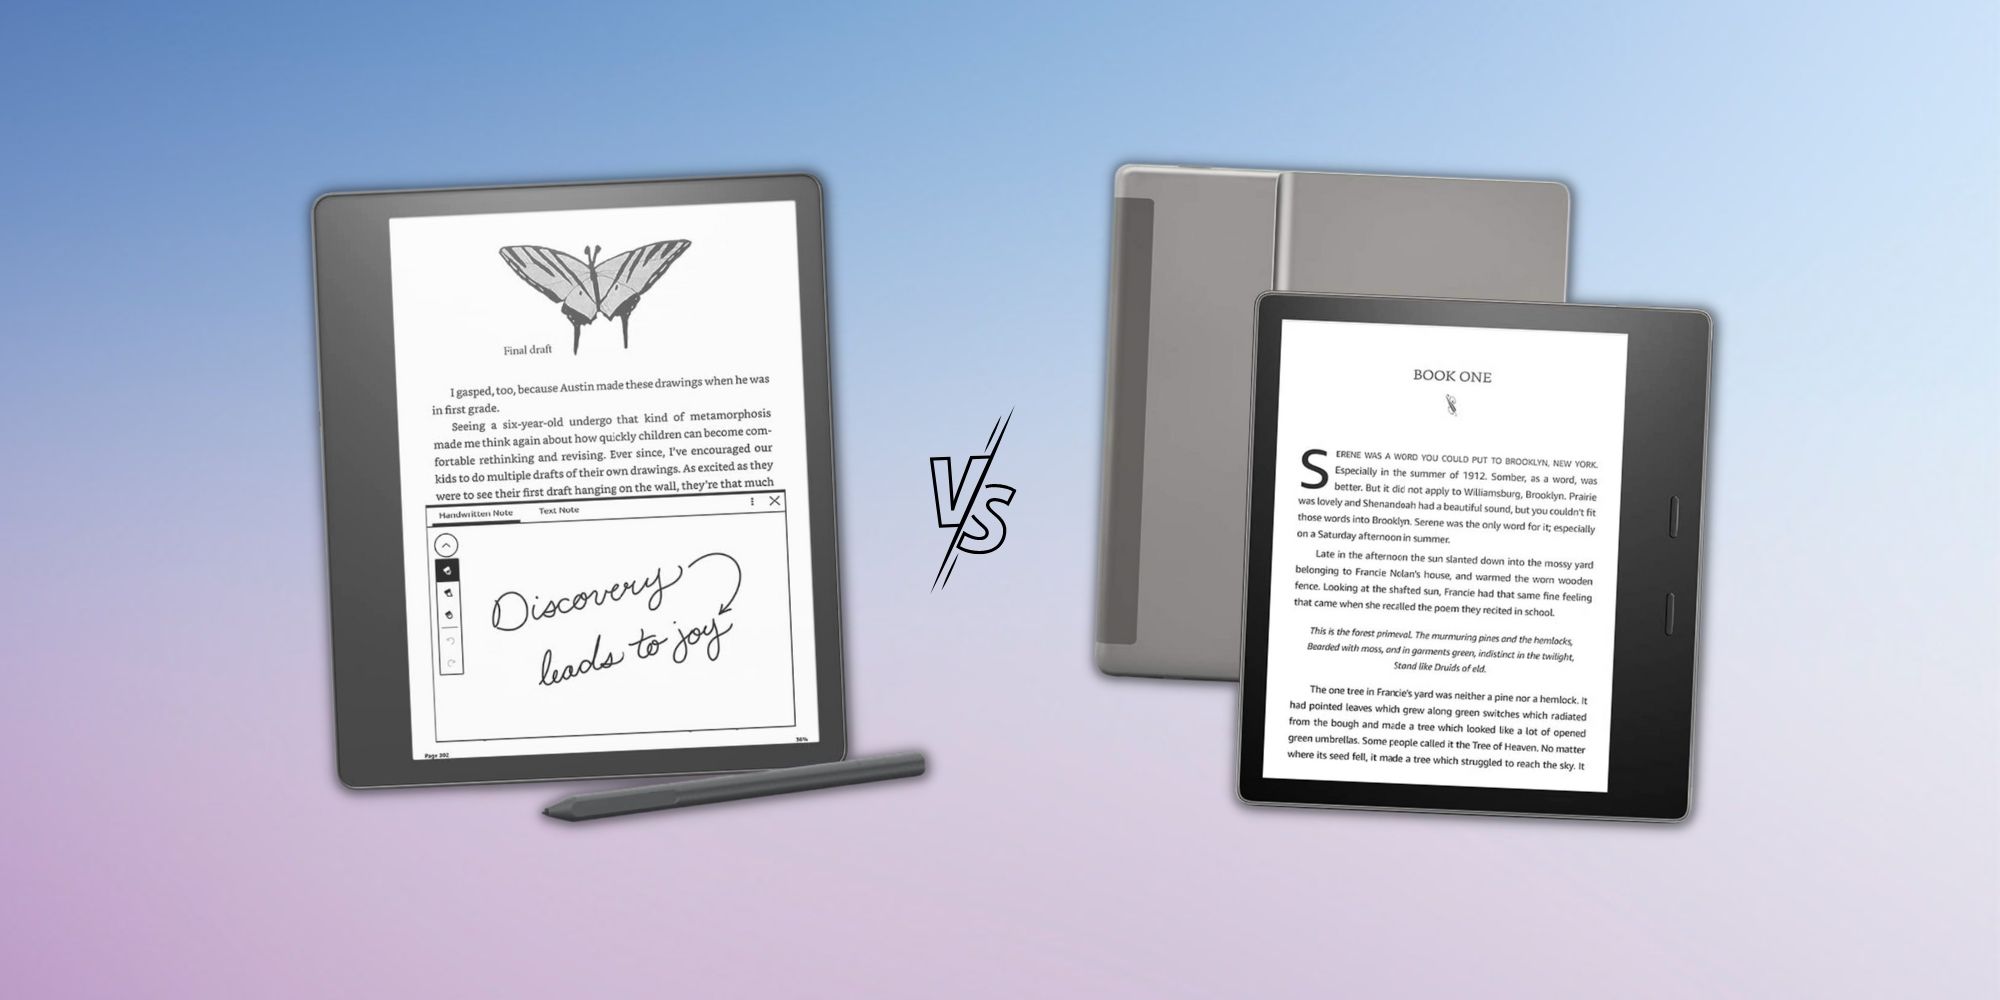 Images of Kindle Scribe and Kindle Oasis with a versus sign in the middle on a gradient background